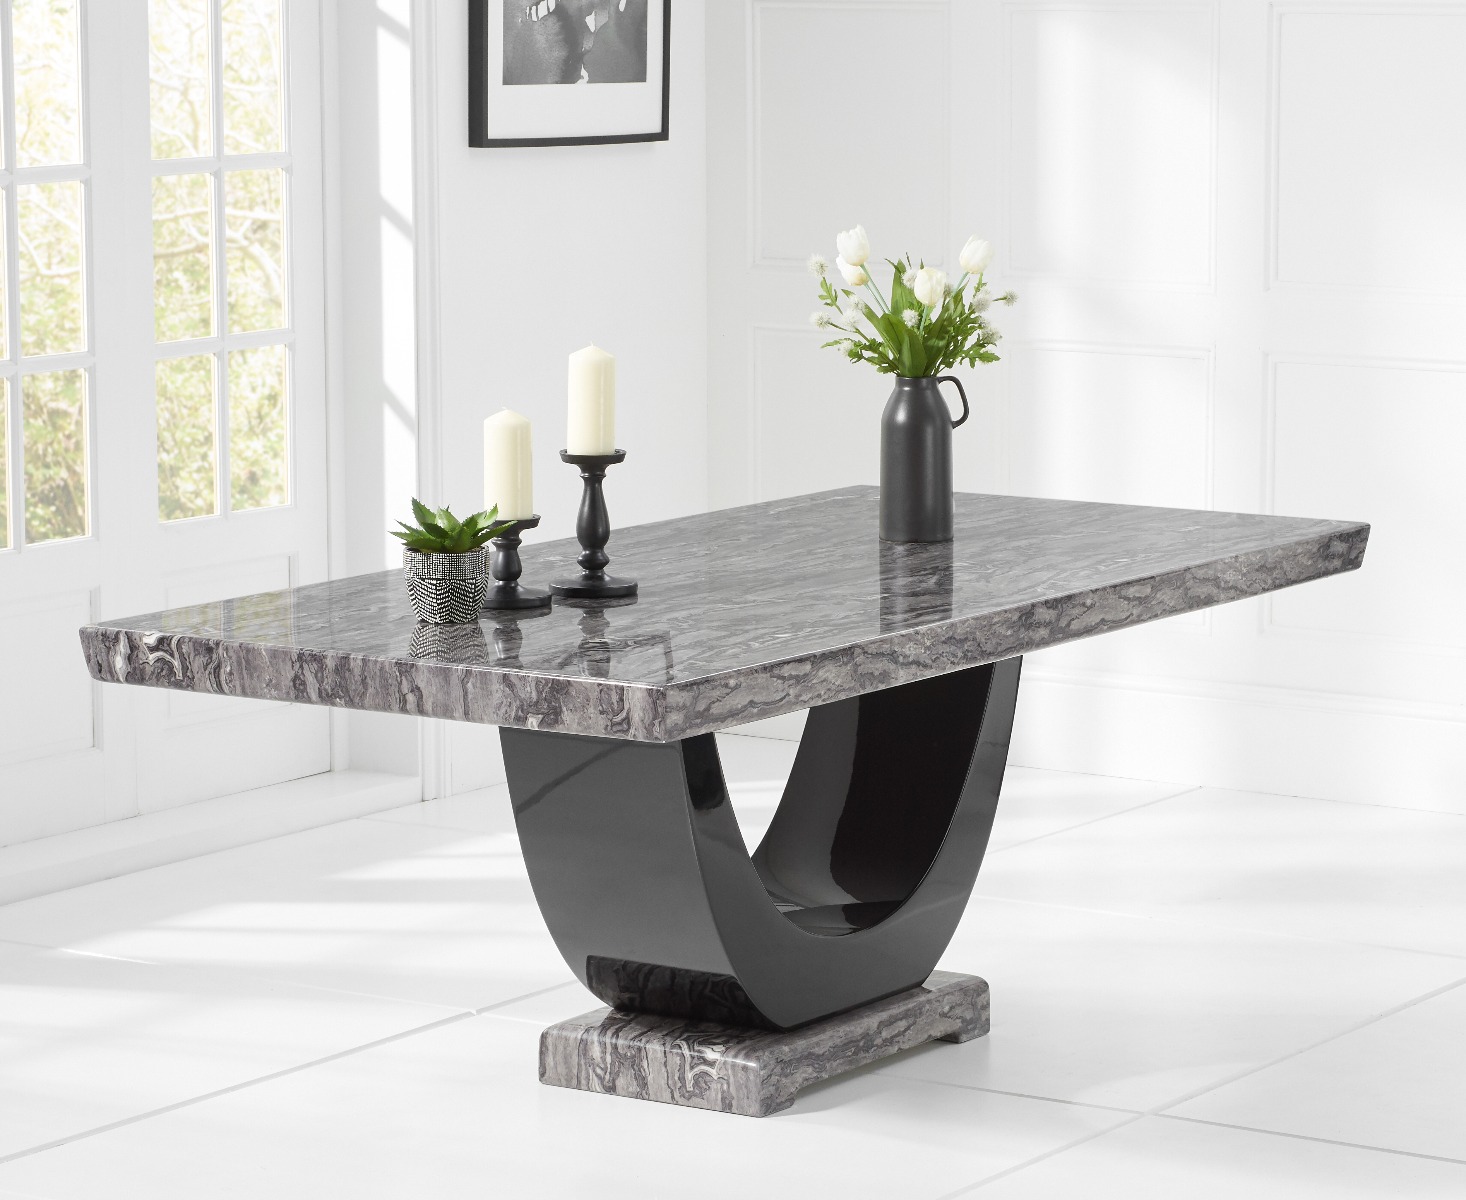 Photo 2 of Raphael 170cm dark grey pedestal marble dining table with 4 grey sophia chairs